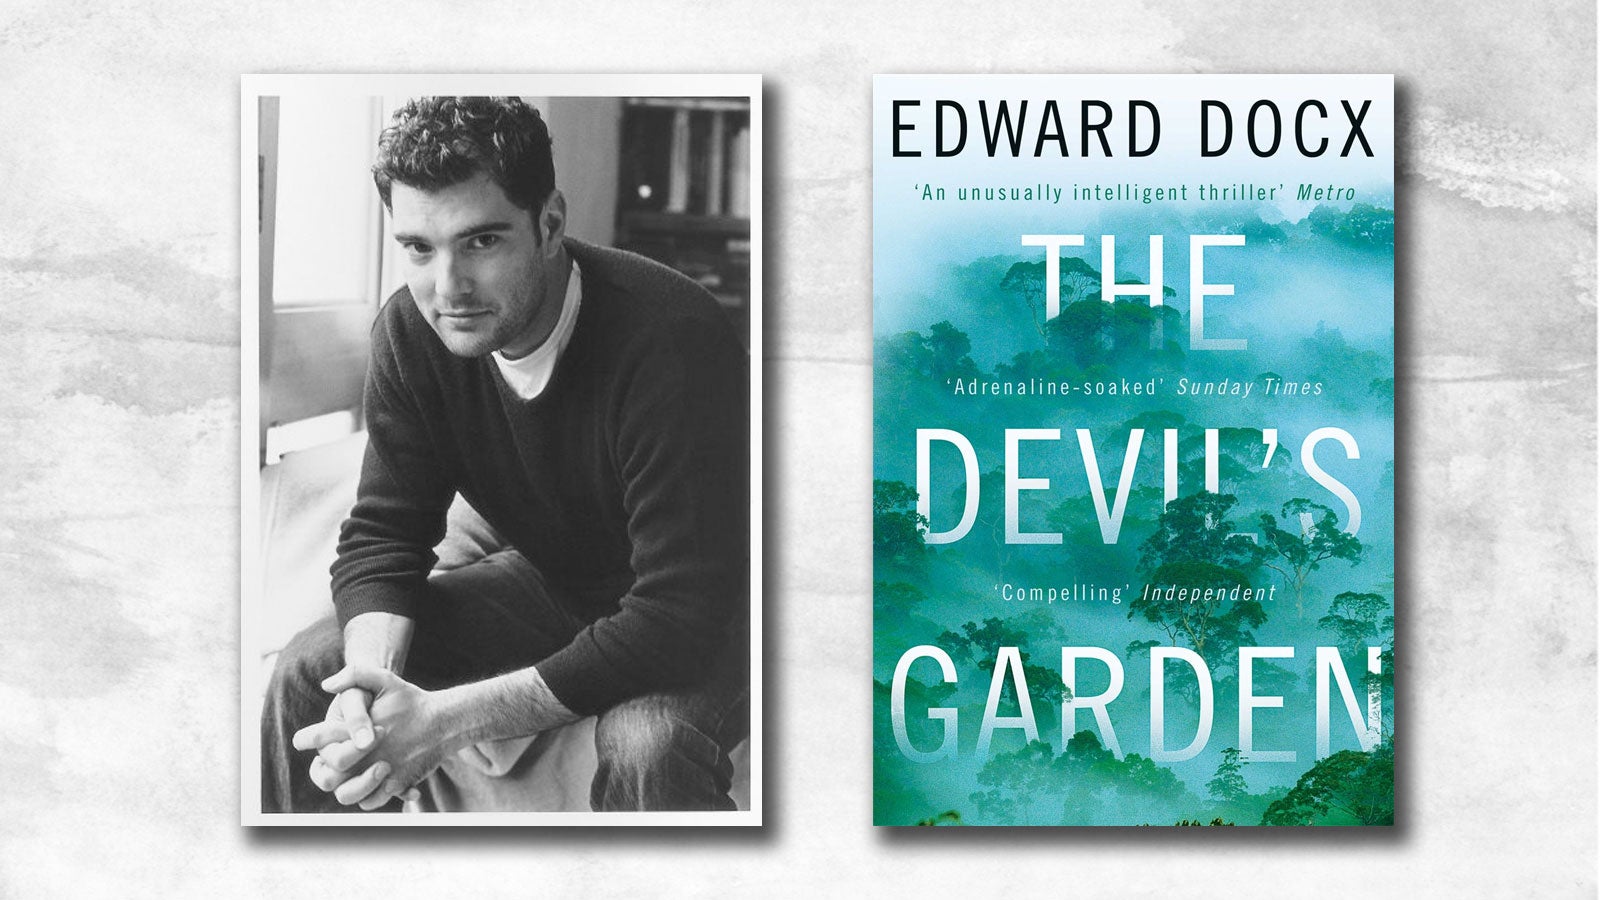 A photo of Edward Docx and his book The Devil's Garden.